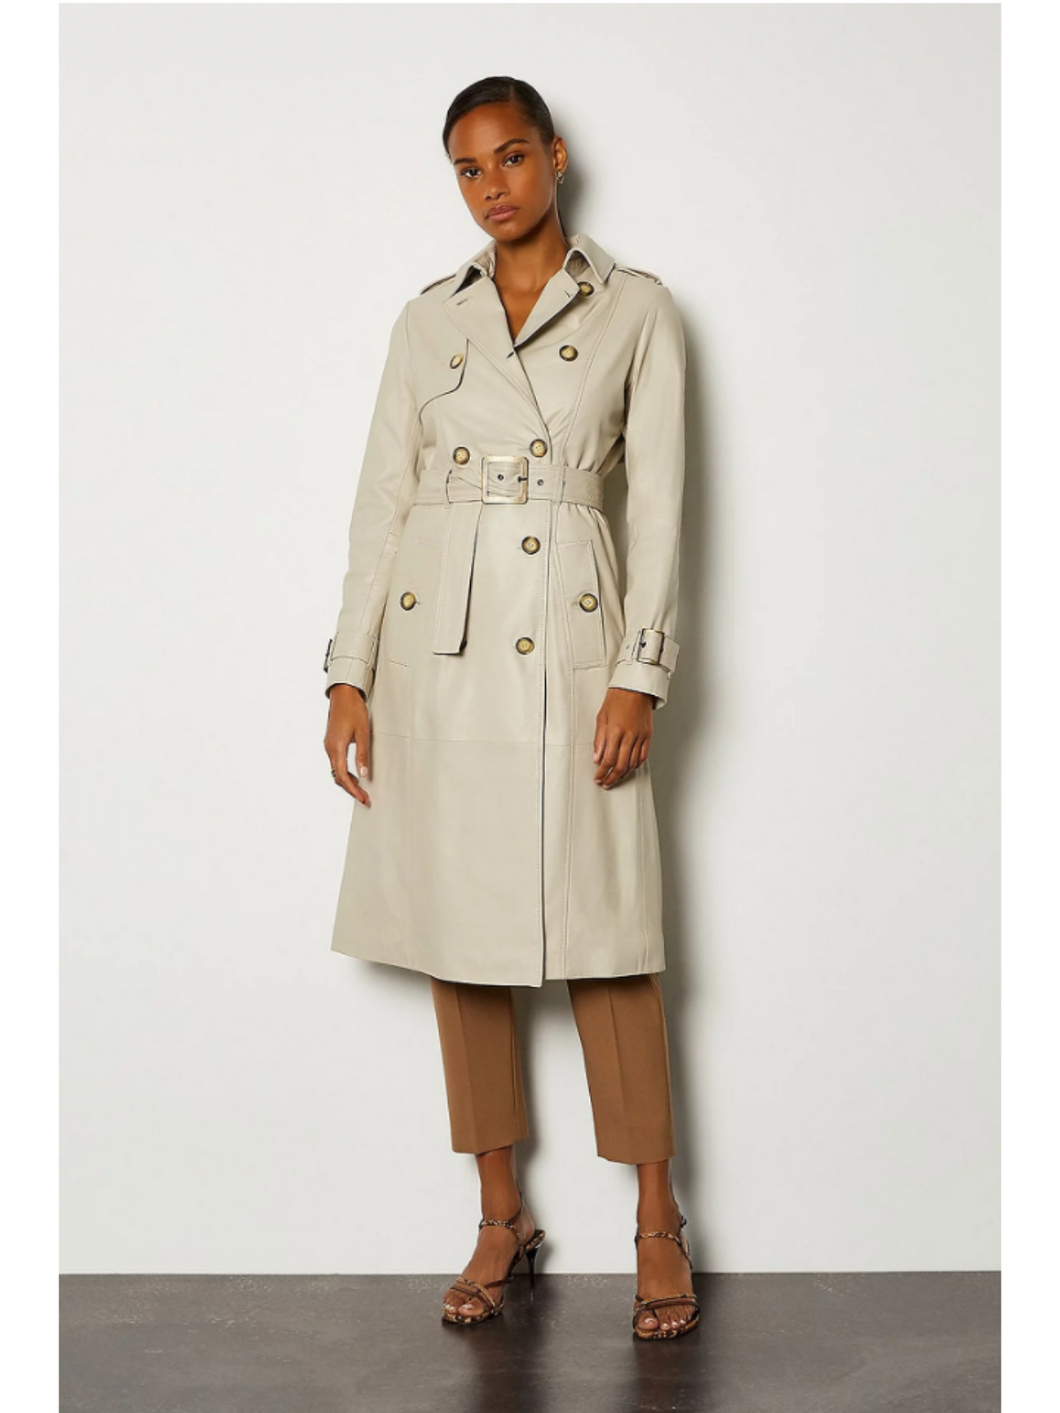 Womens Stylish Beige Leather Trench Coat